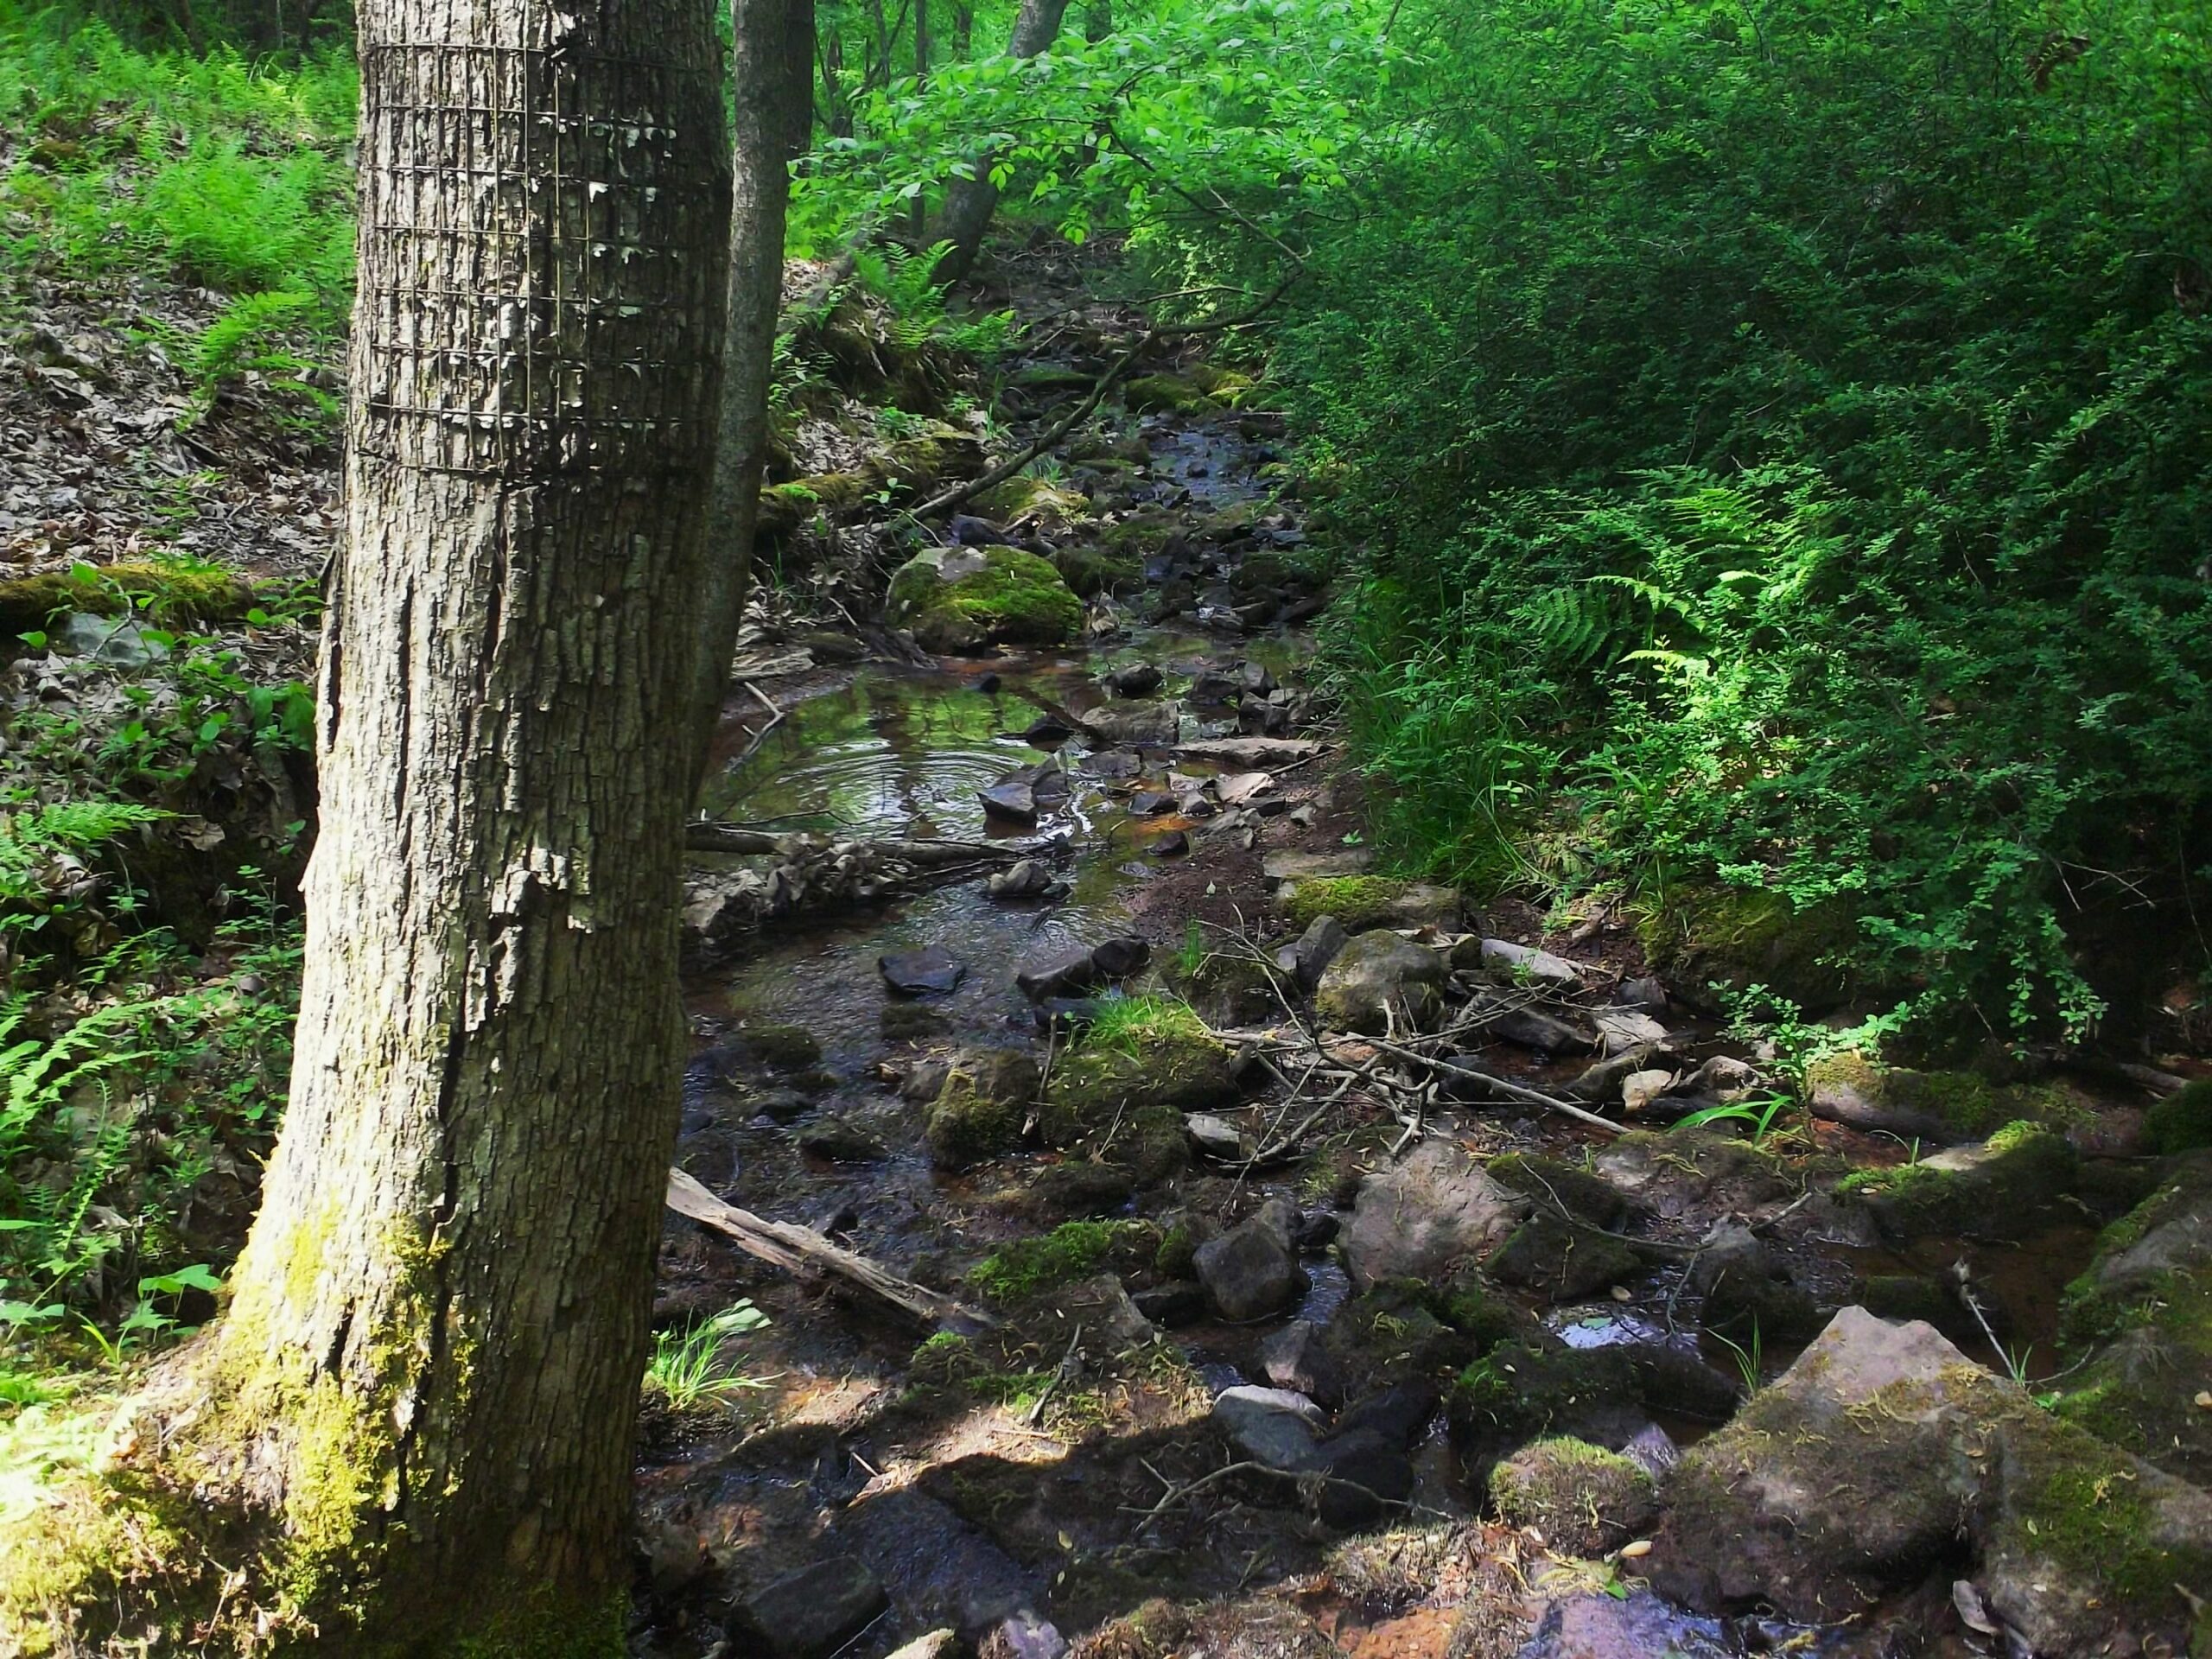 Berks Nature Protects 131 Acres in Schuylkill County, Supporting Regional Climate Resiliency